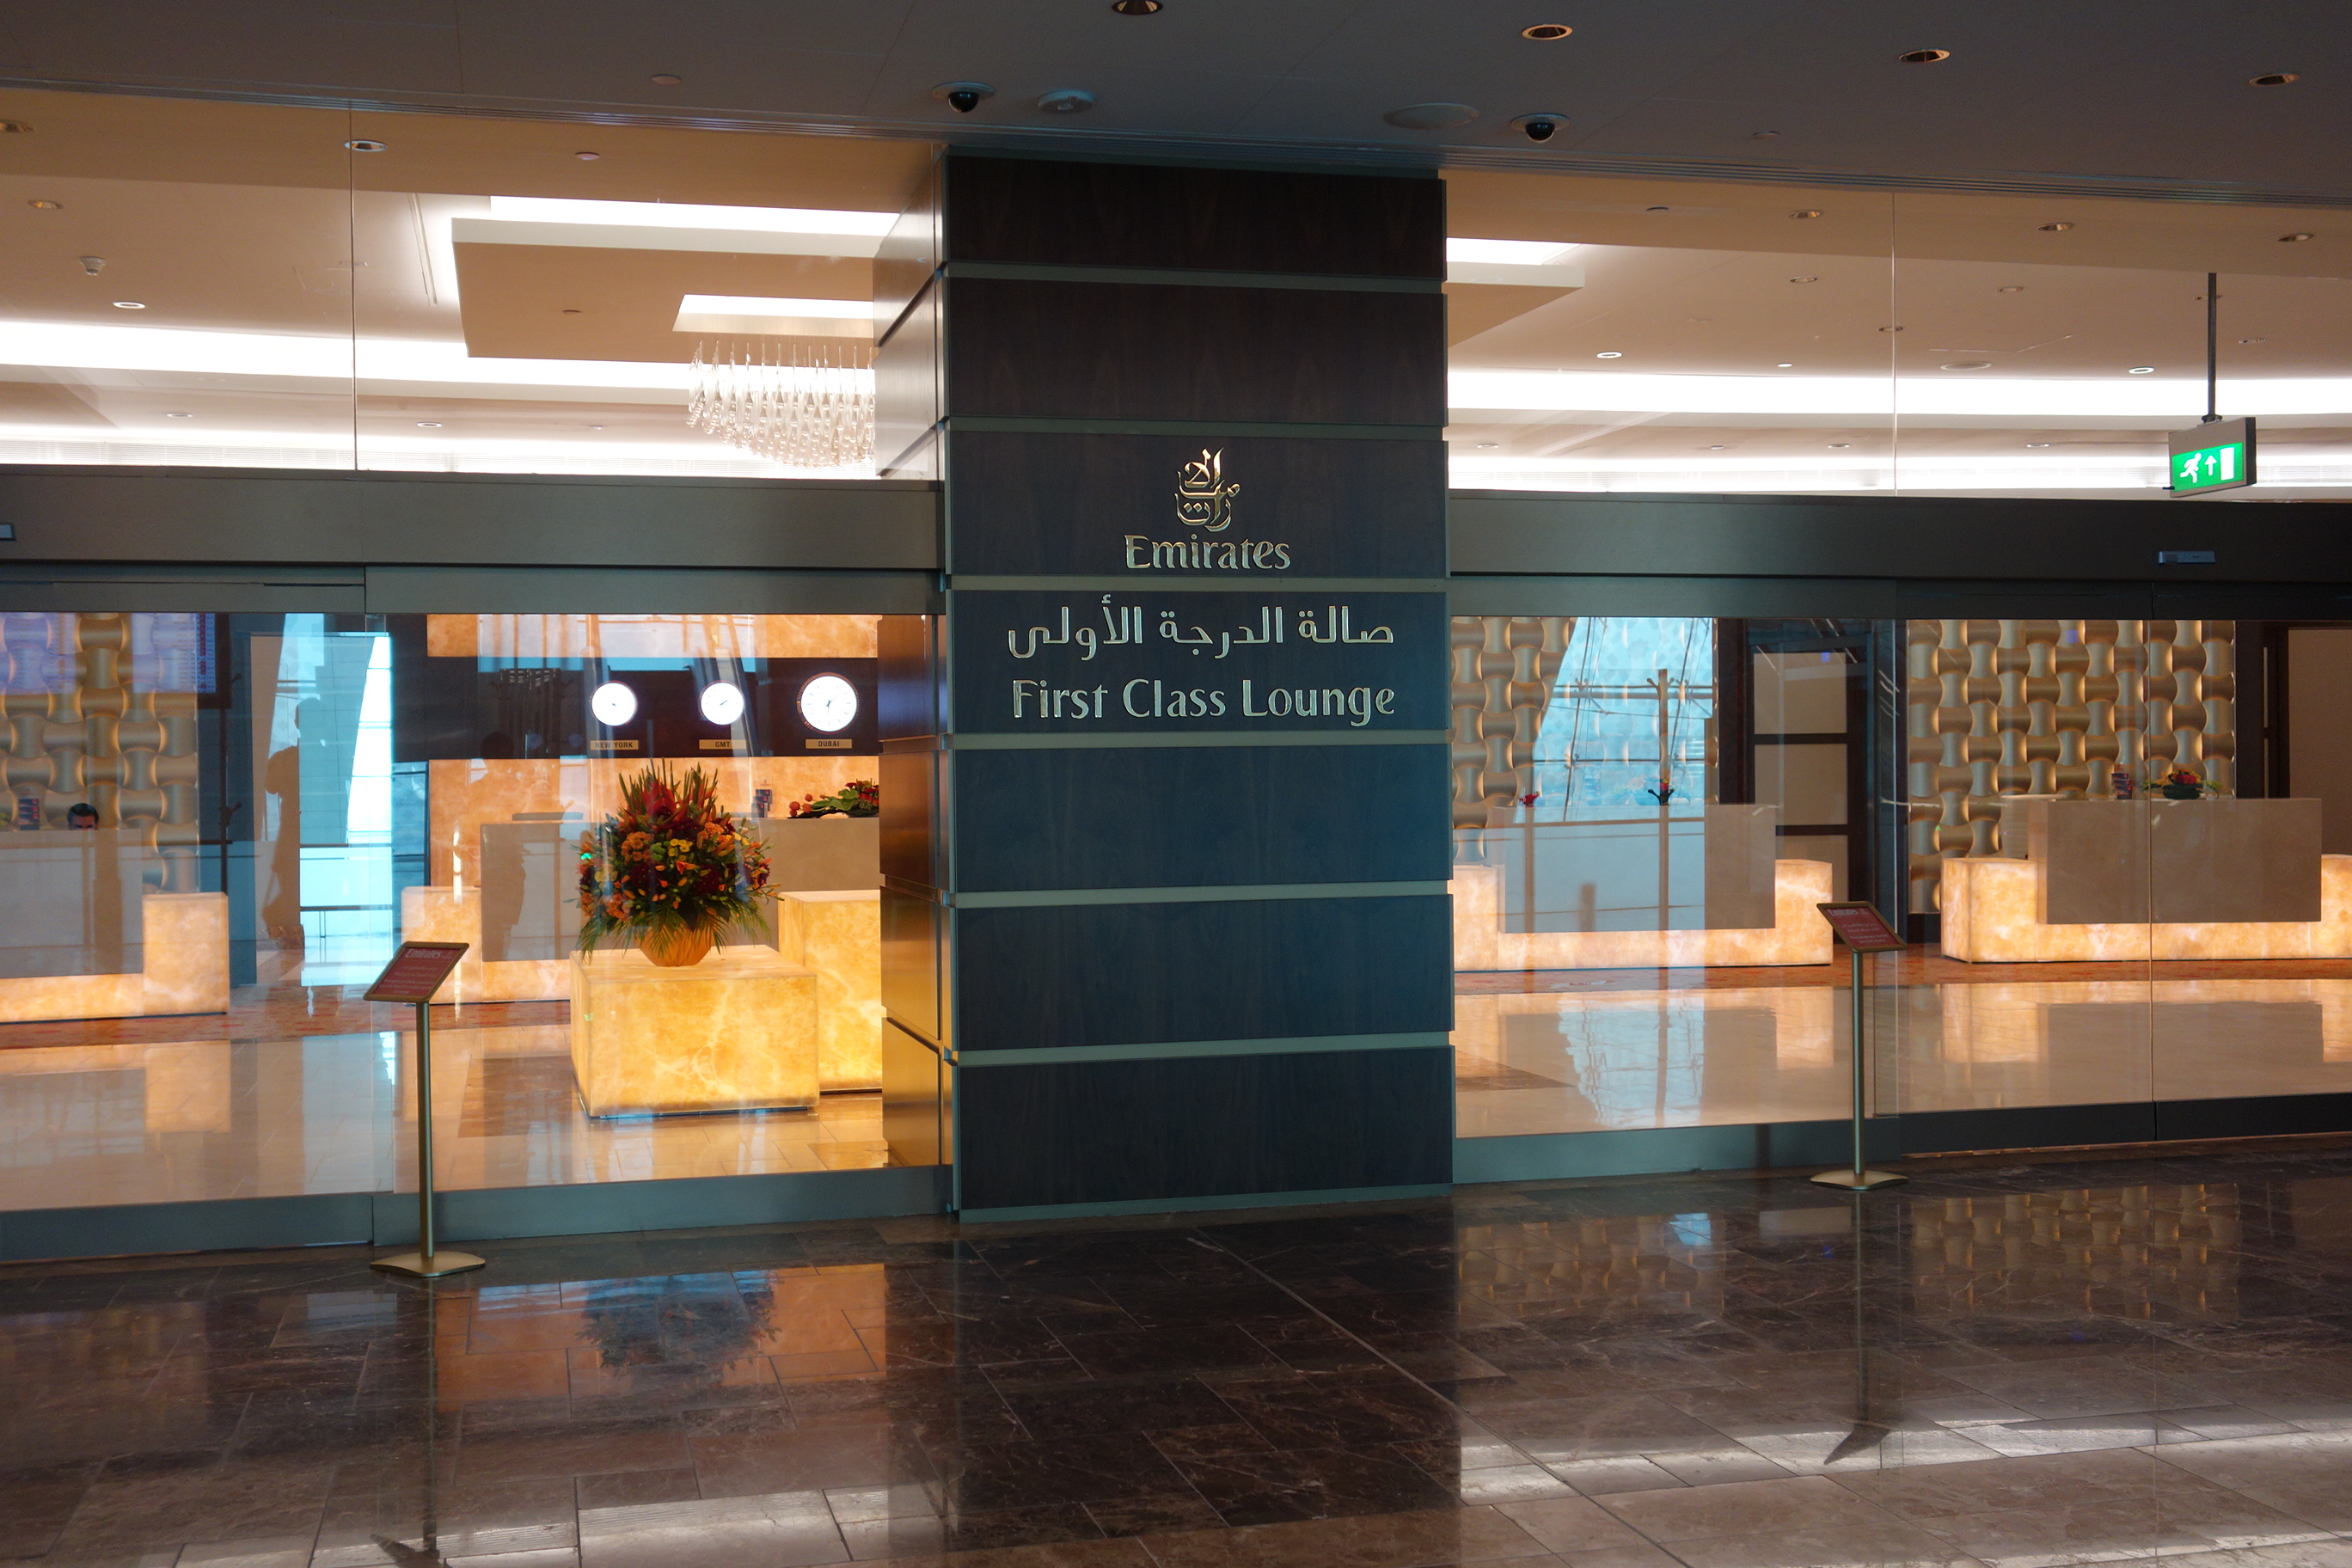 The real first class lounge?